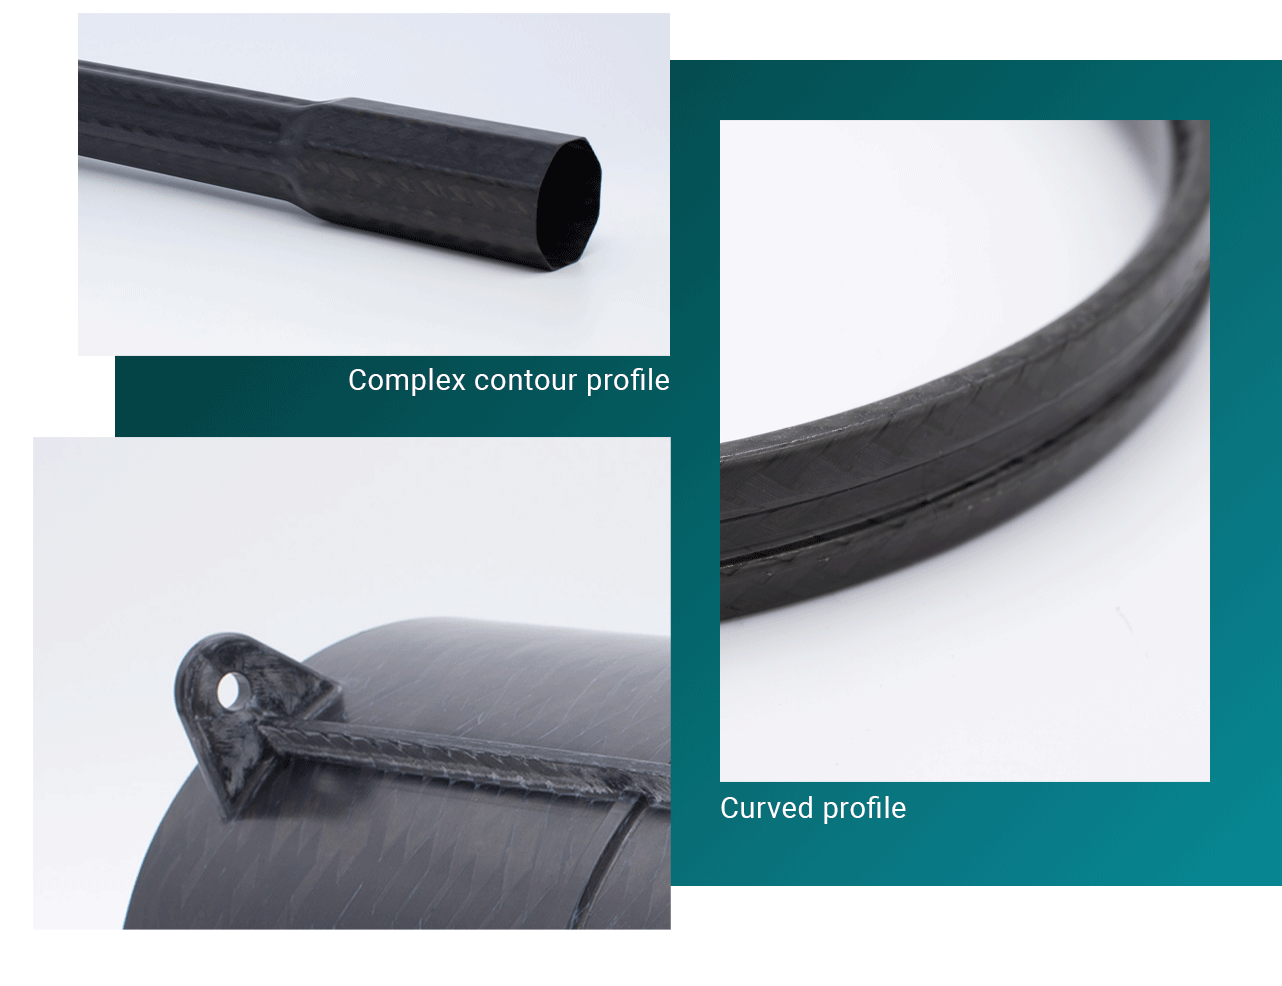 Thermoplastic composite; fiber reinforced thermoplastic (FRTP); Carbon fiber reinforced thermoplastic (CFRTP) profiles The profieles can be made from CF-PEEK, CF-PAEK, CF-PEKK, CF-PPS, CF-PA, GF-PEEK, GF-PAEK, GF-PEKK, GF-PPS, CF-PA Complex contour profile with variable cross-sections Curved profile Curved Pipe with fitting, racket Profile with functions The functions are co-consolidated directly onto the profiles. The profiles are ultralight and cost-effective and sustainable